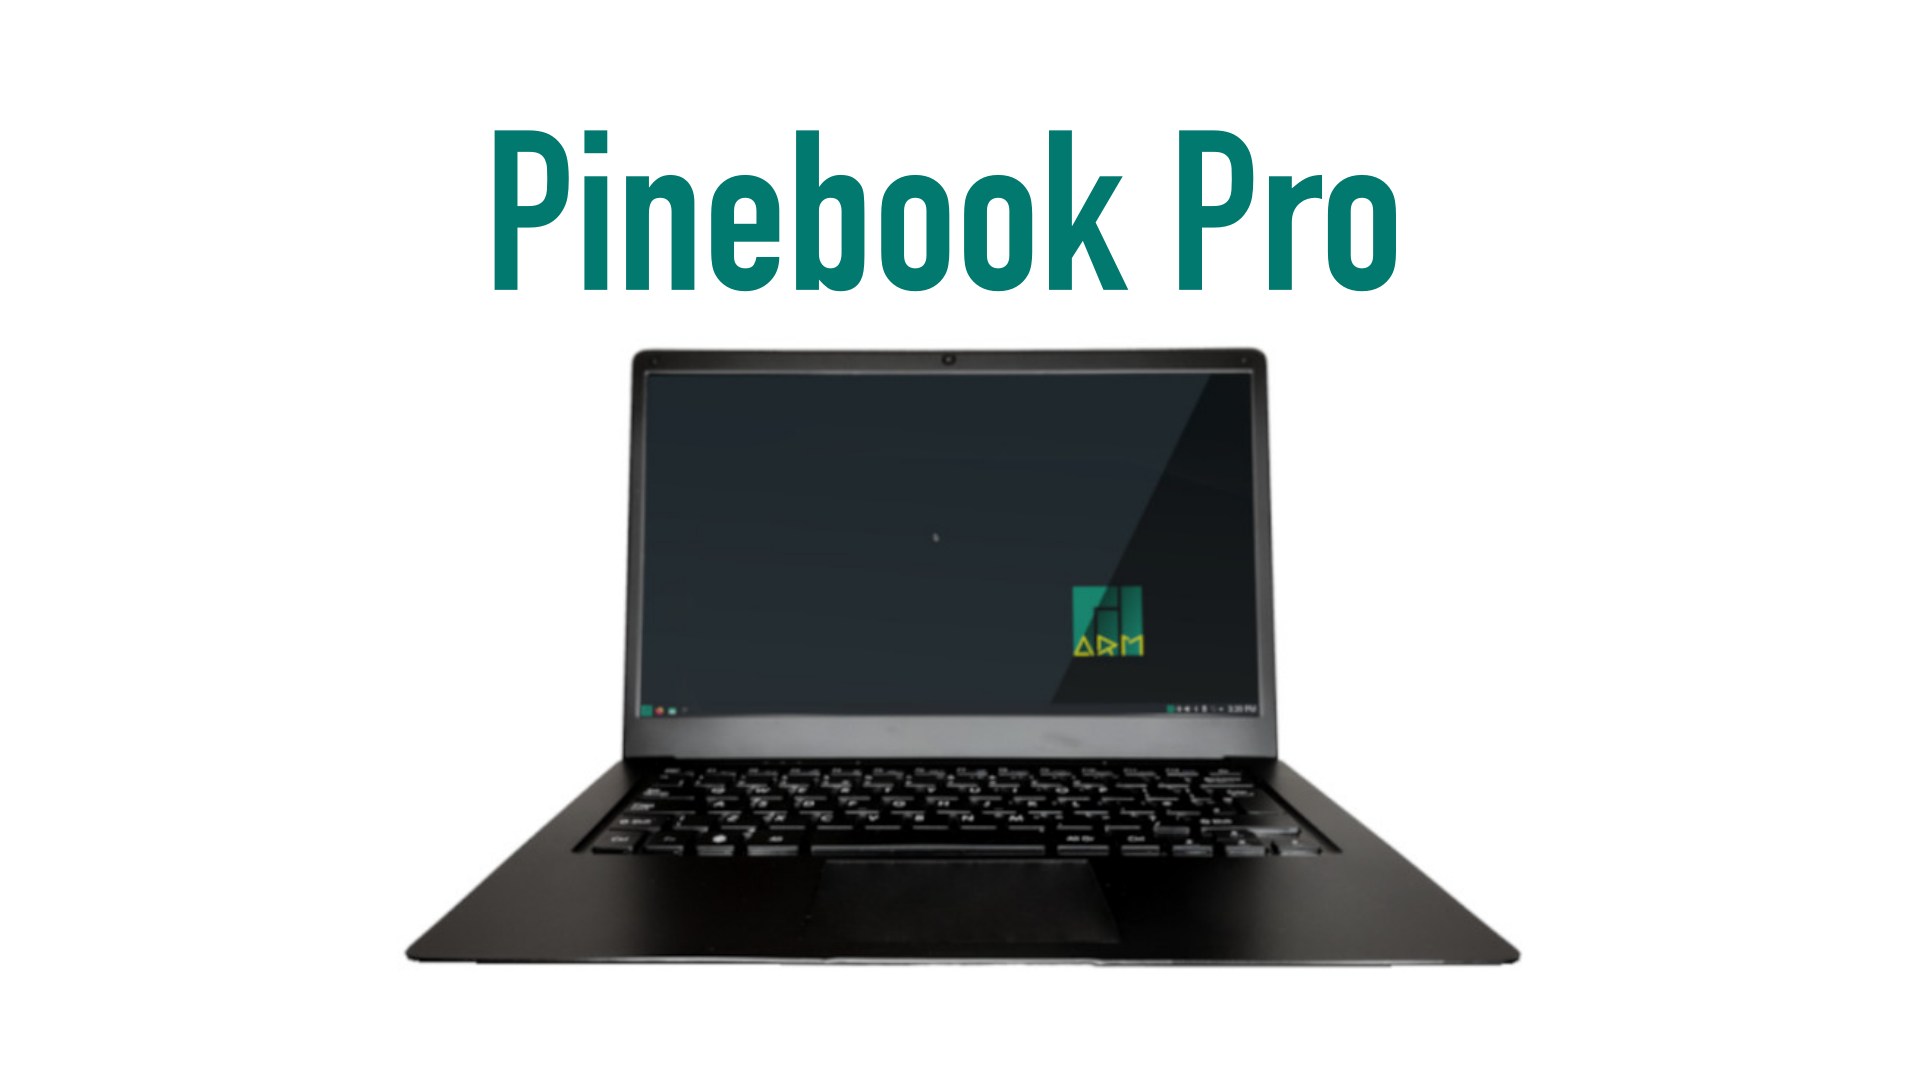 Pinebook Pro Linux Laptop Is Back in Stock and You Can Get One for Only $220 USD